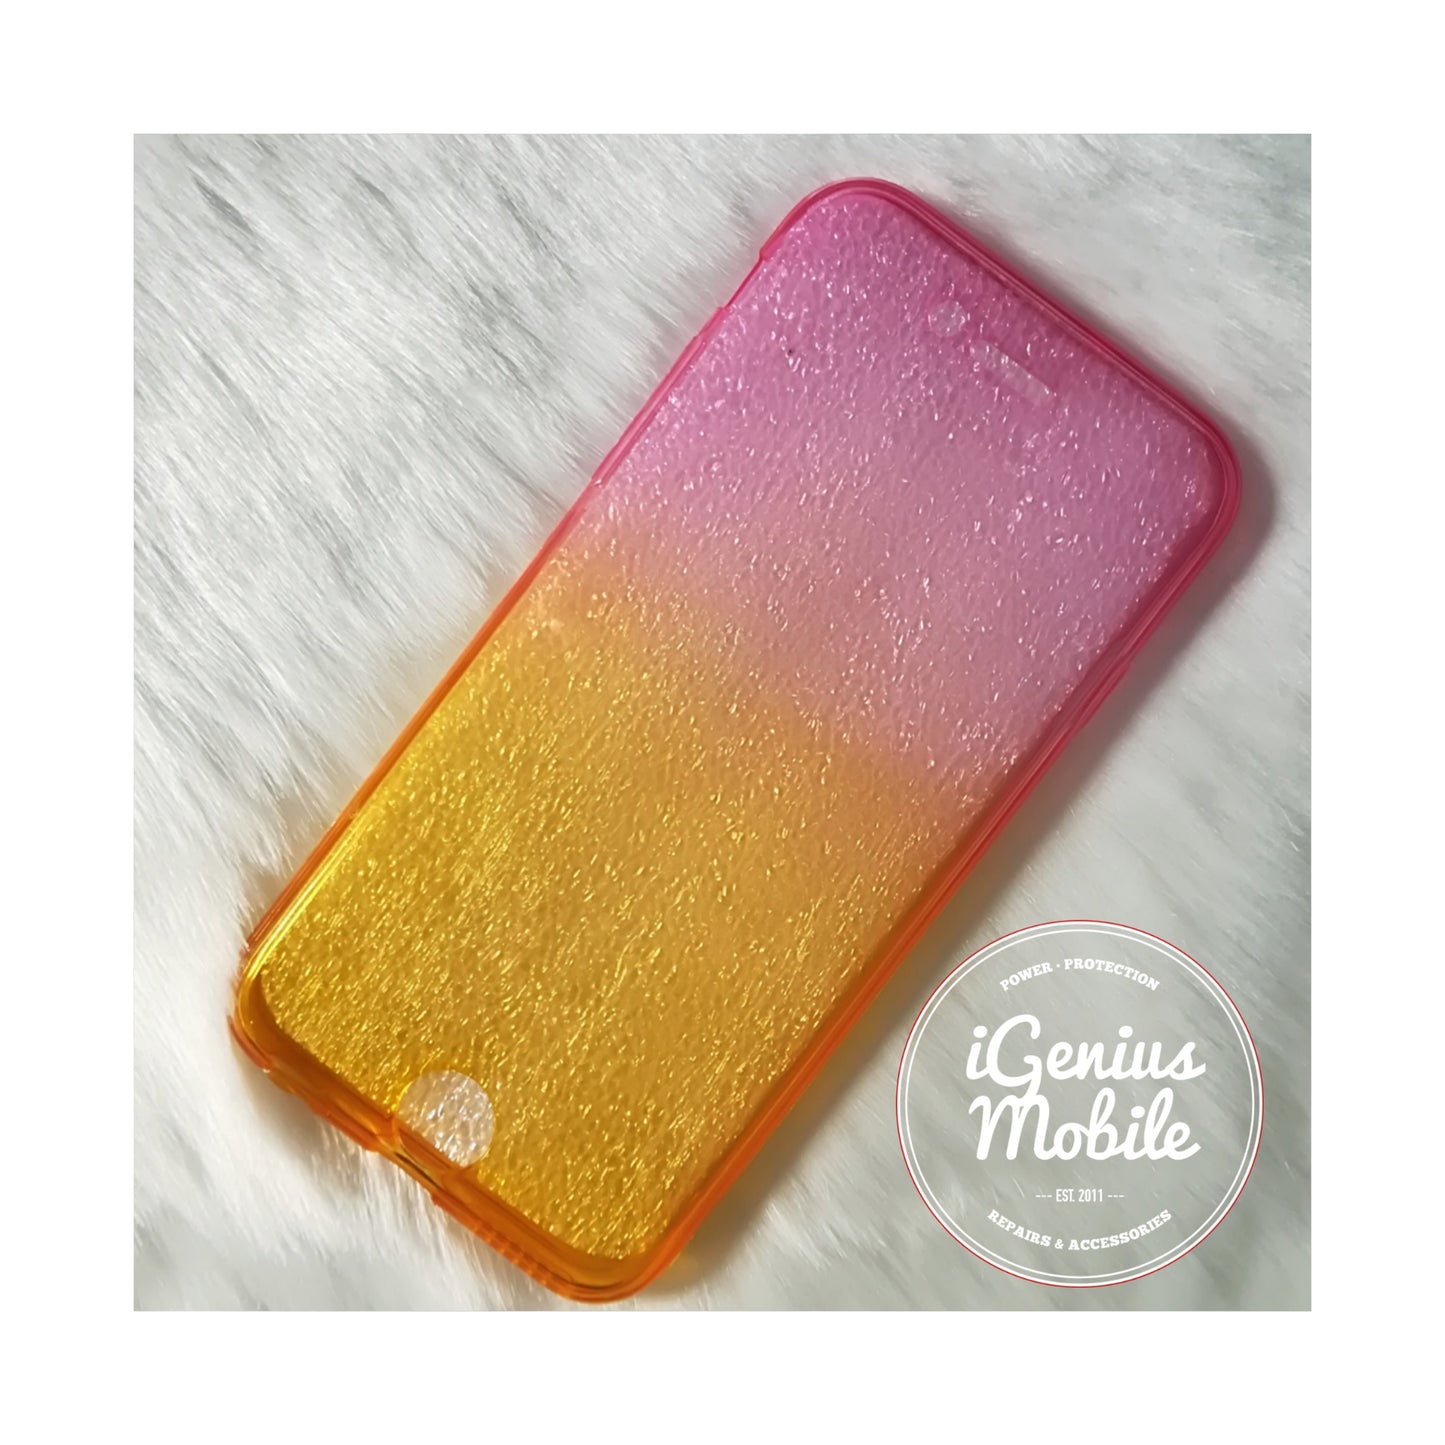 SALE - Shockproof Ombré Case (Silicone, Pink & Yellow)